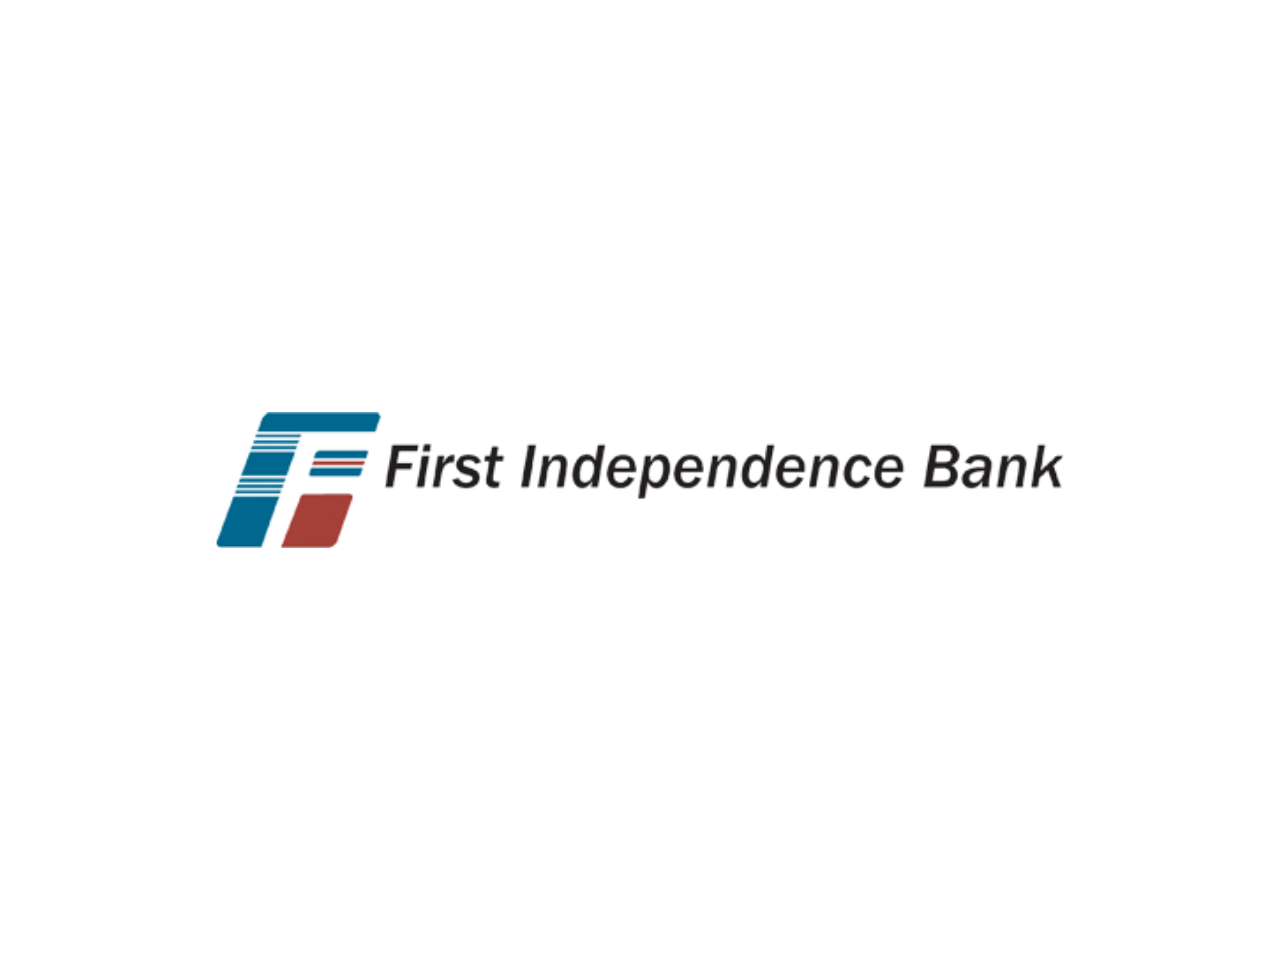 First Independence Bank